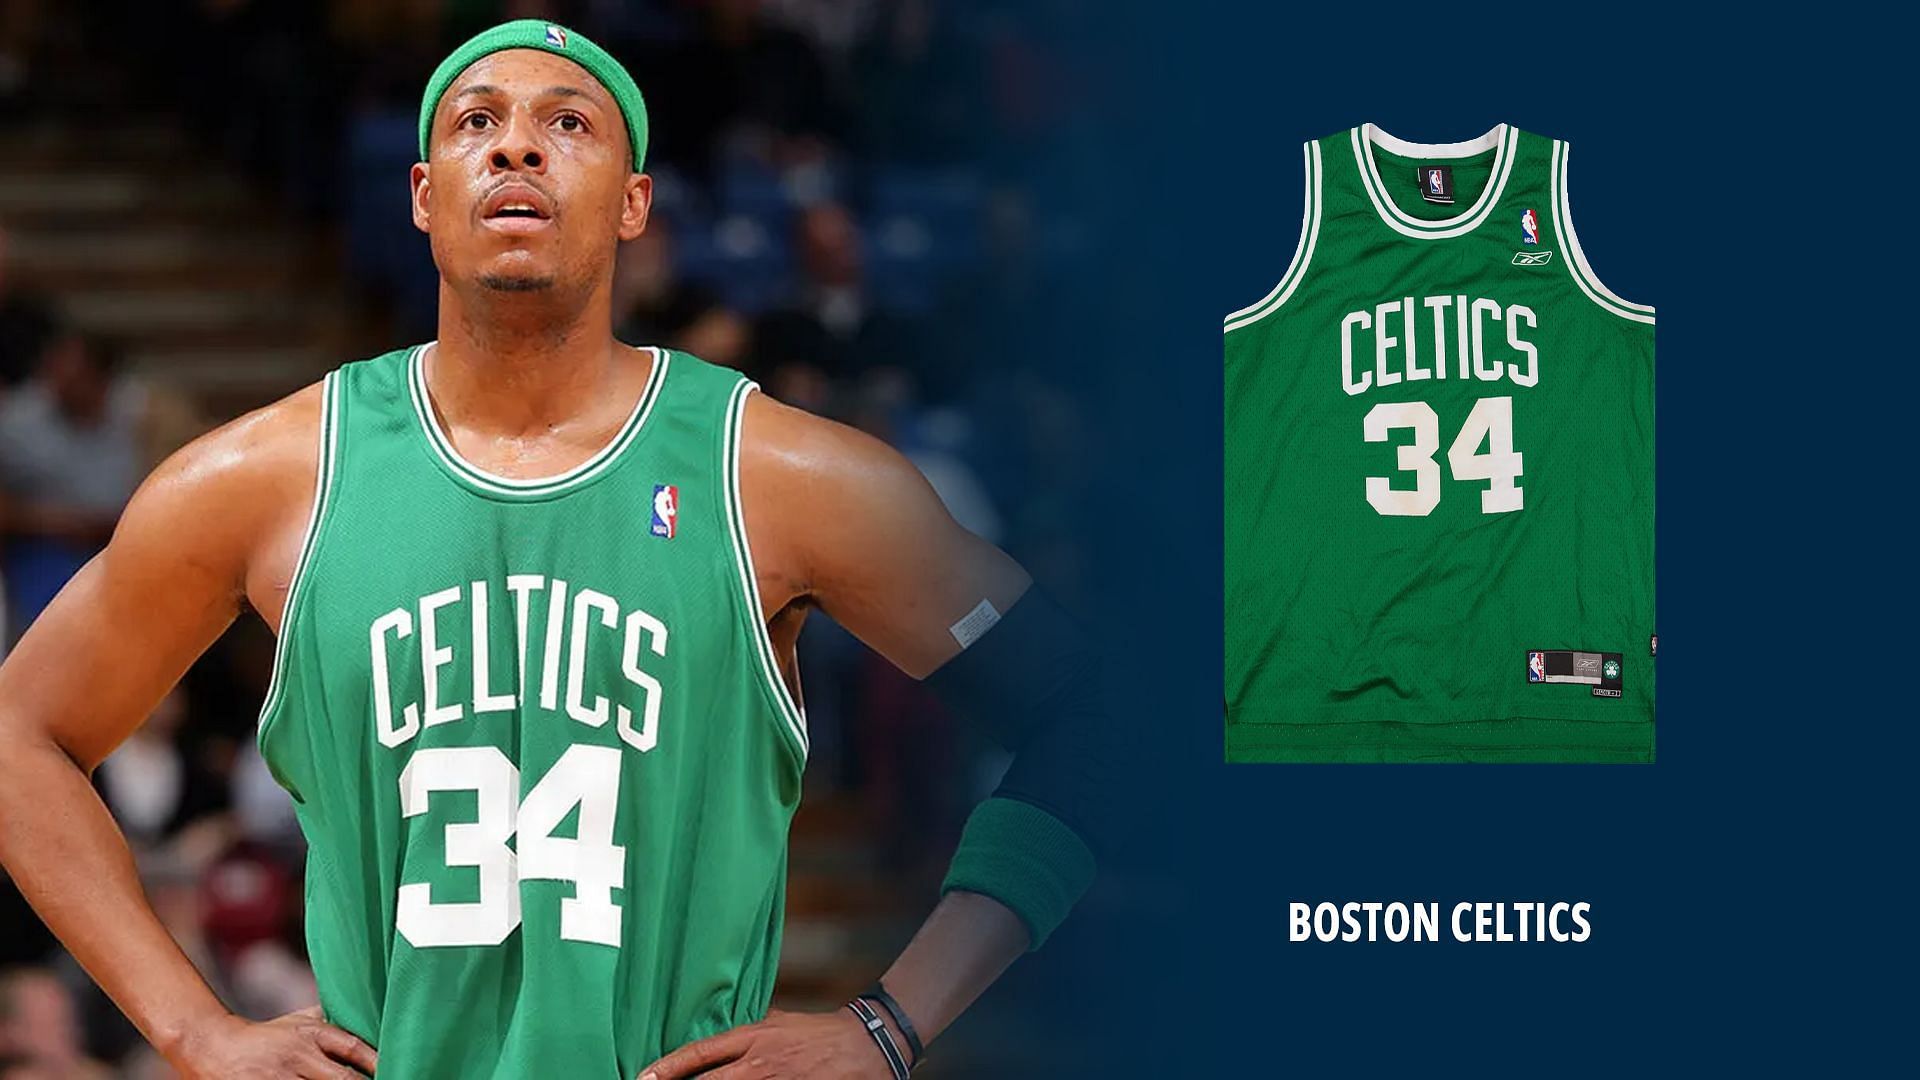 The Celtics haven&#039;t changed much about their jerseys either